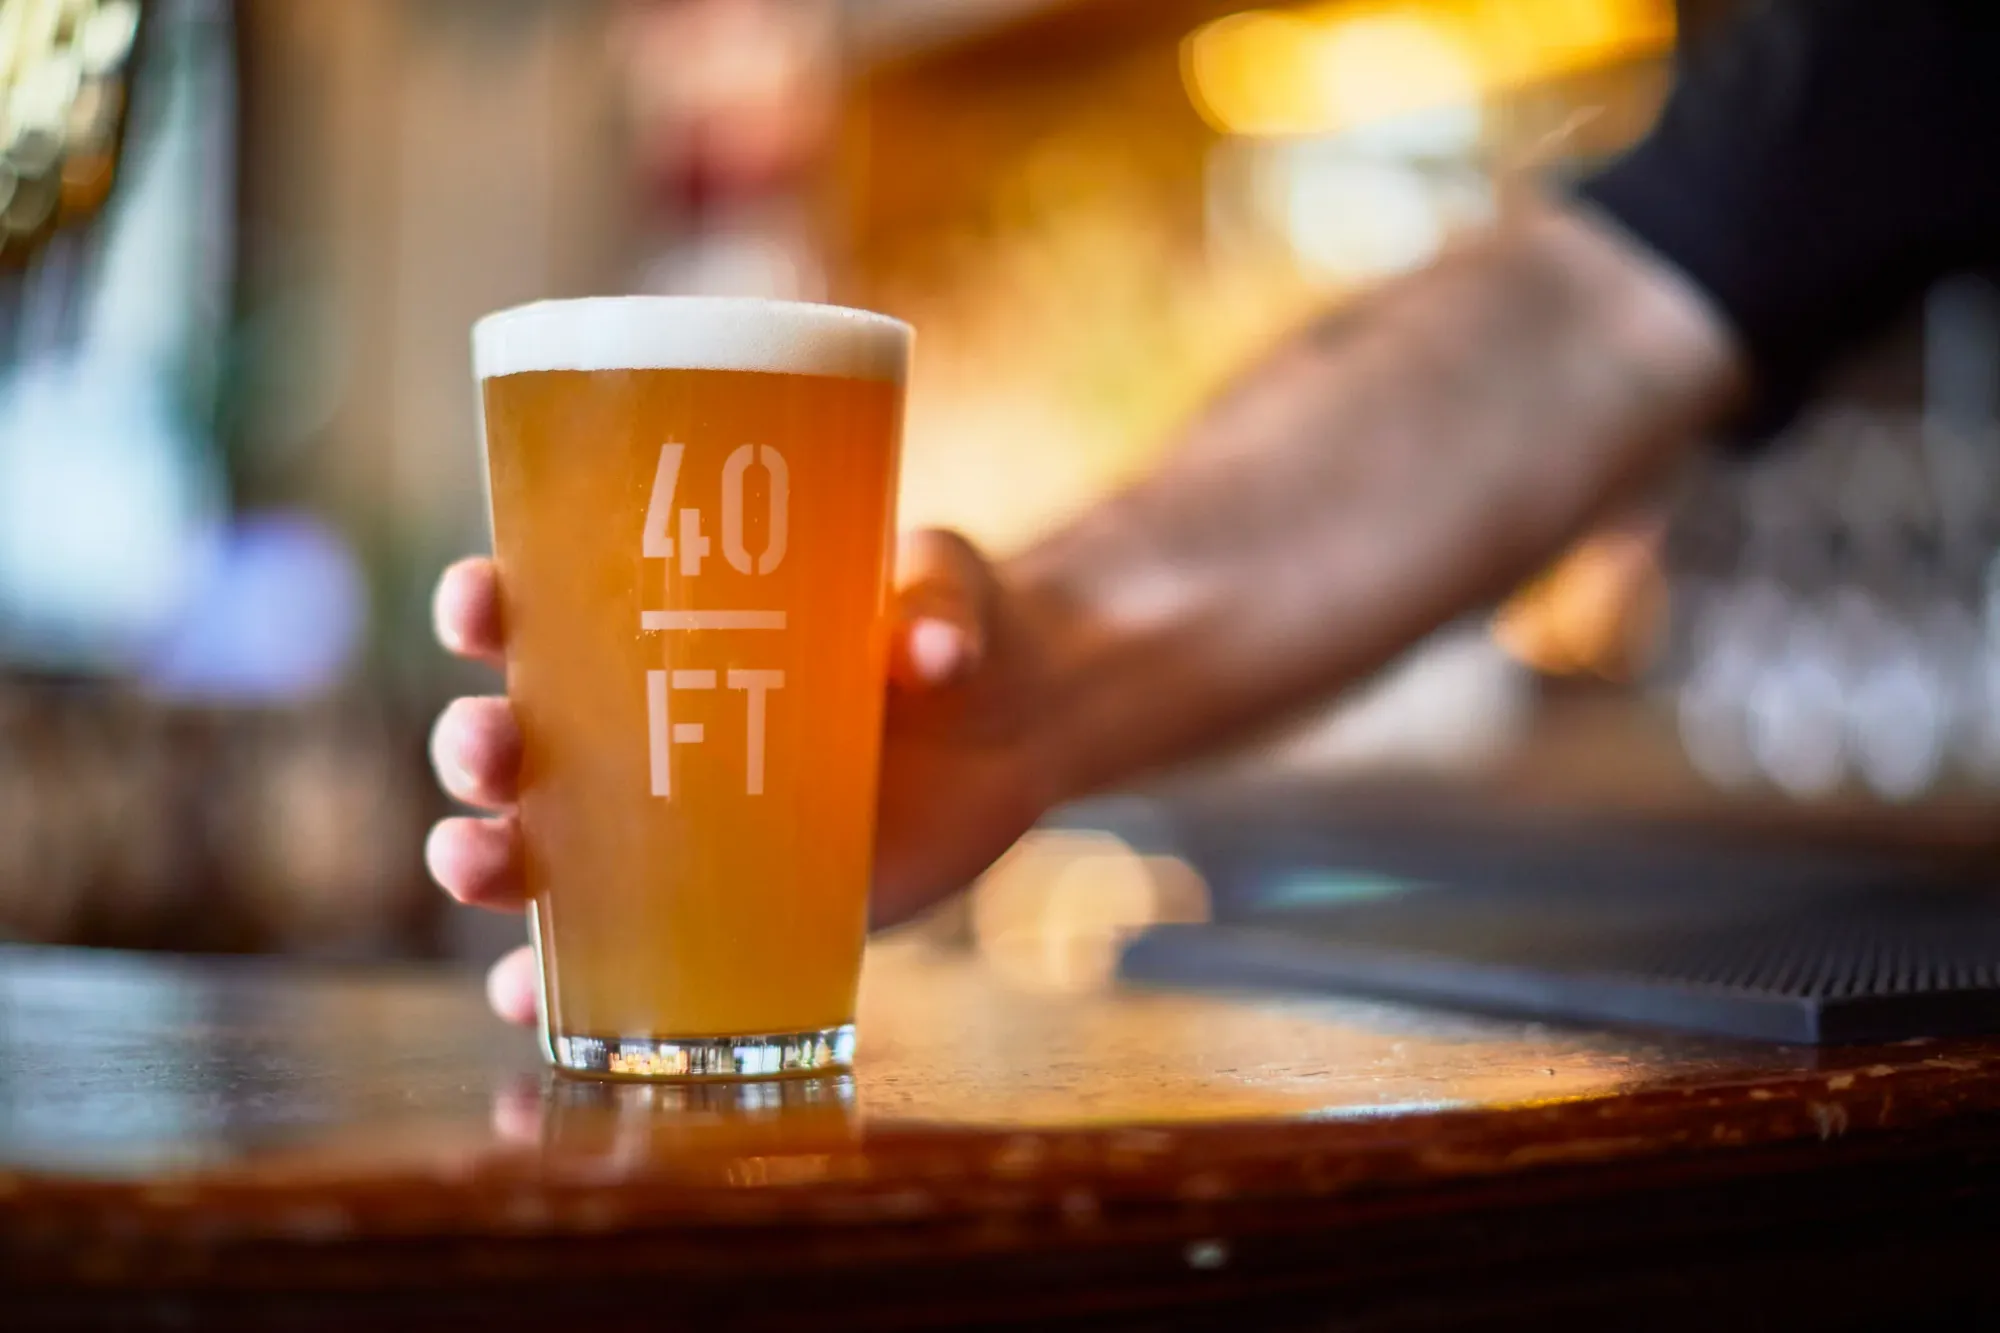 Taproom Staff at 40FT Brewing in Dalston